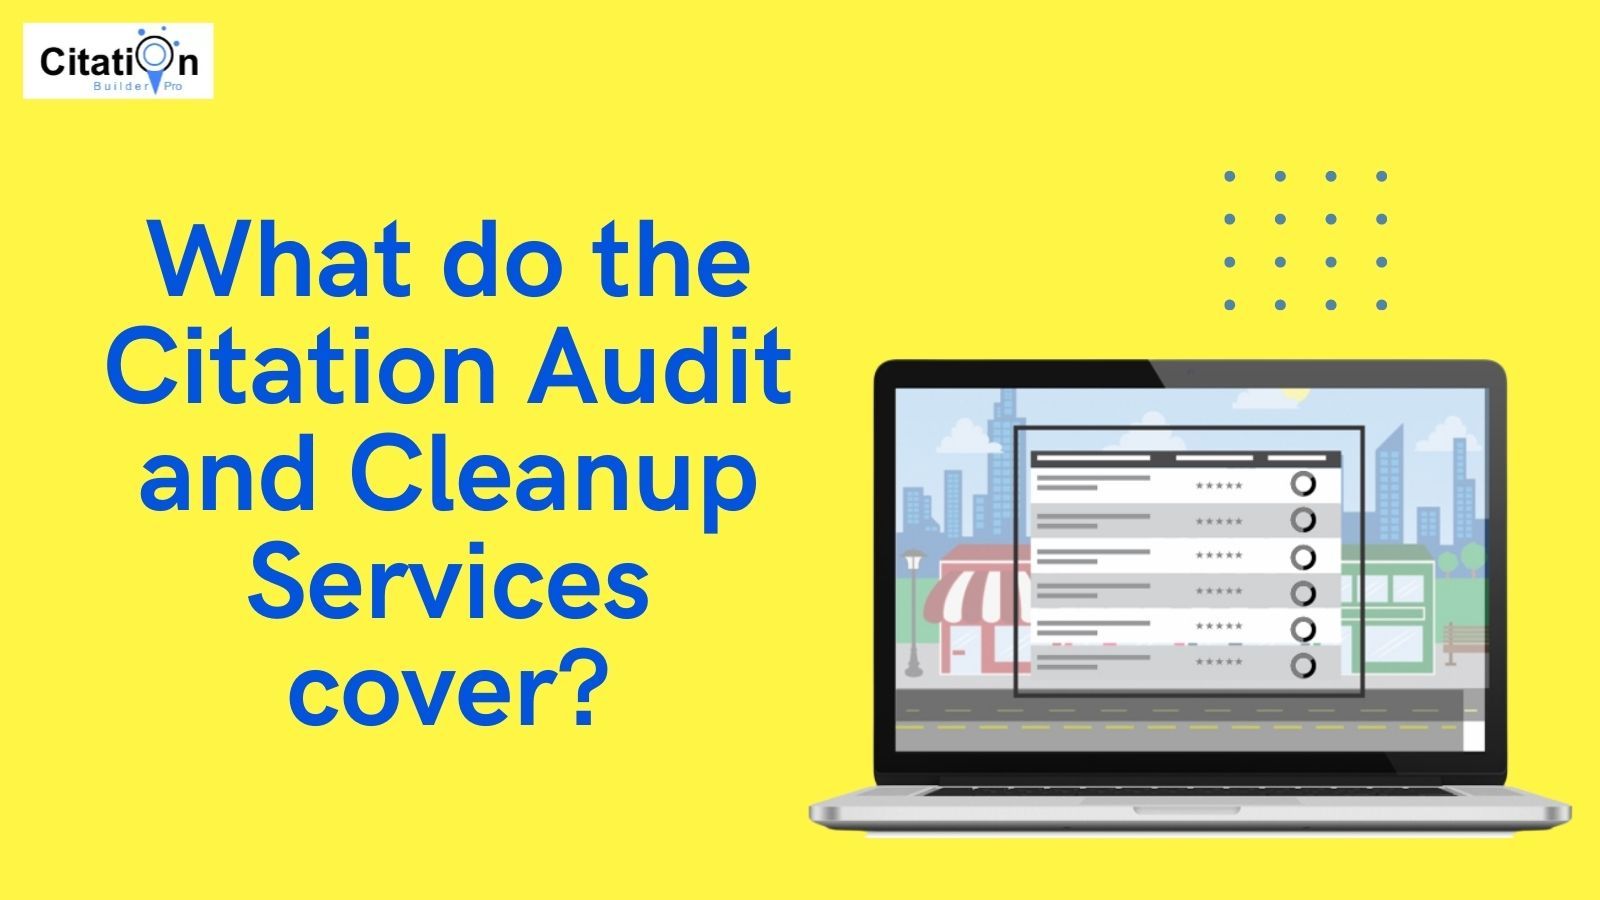 What do the Citation Audit and Cleanup Services cover